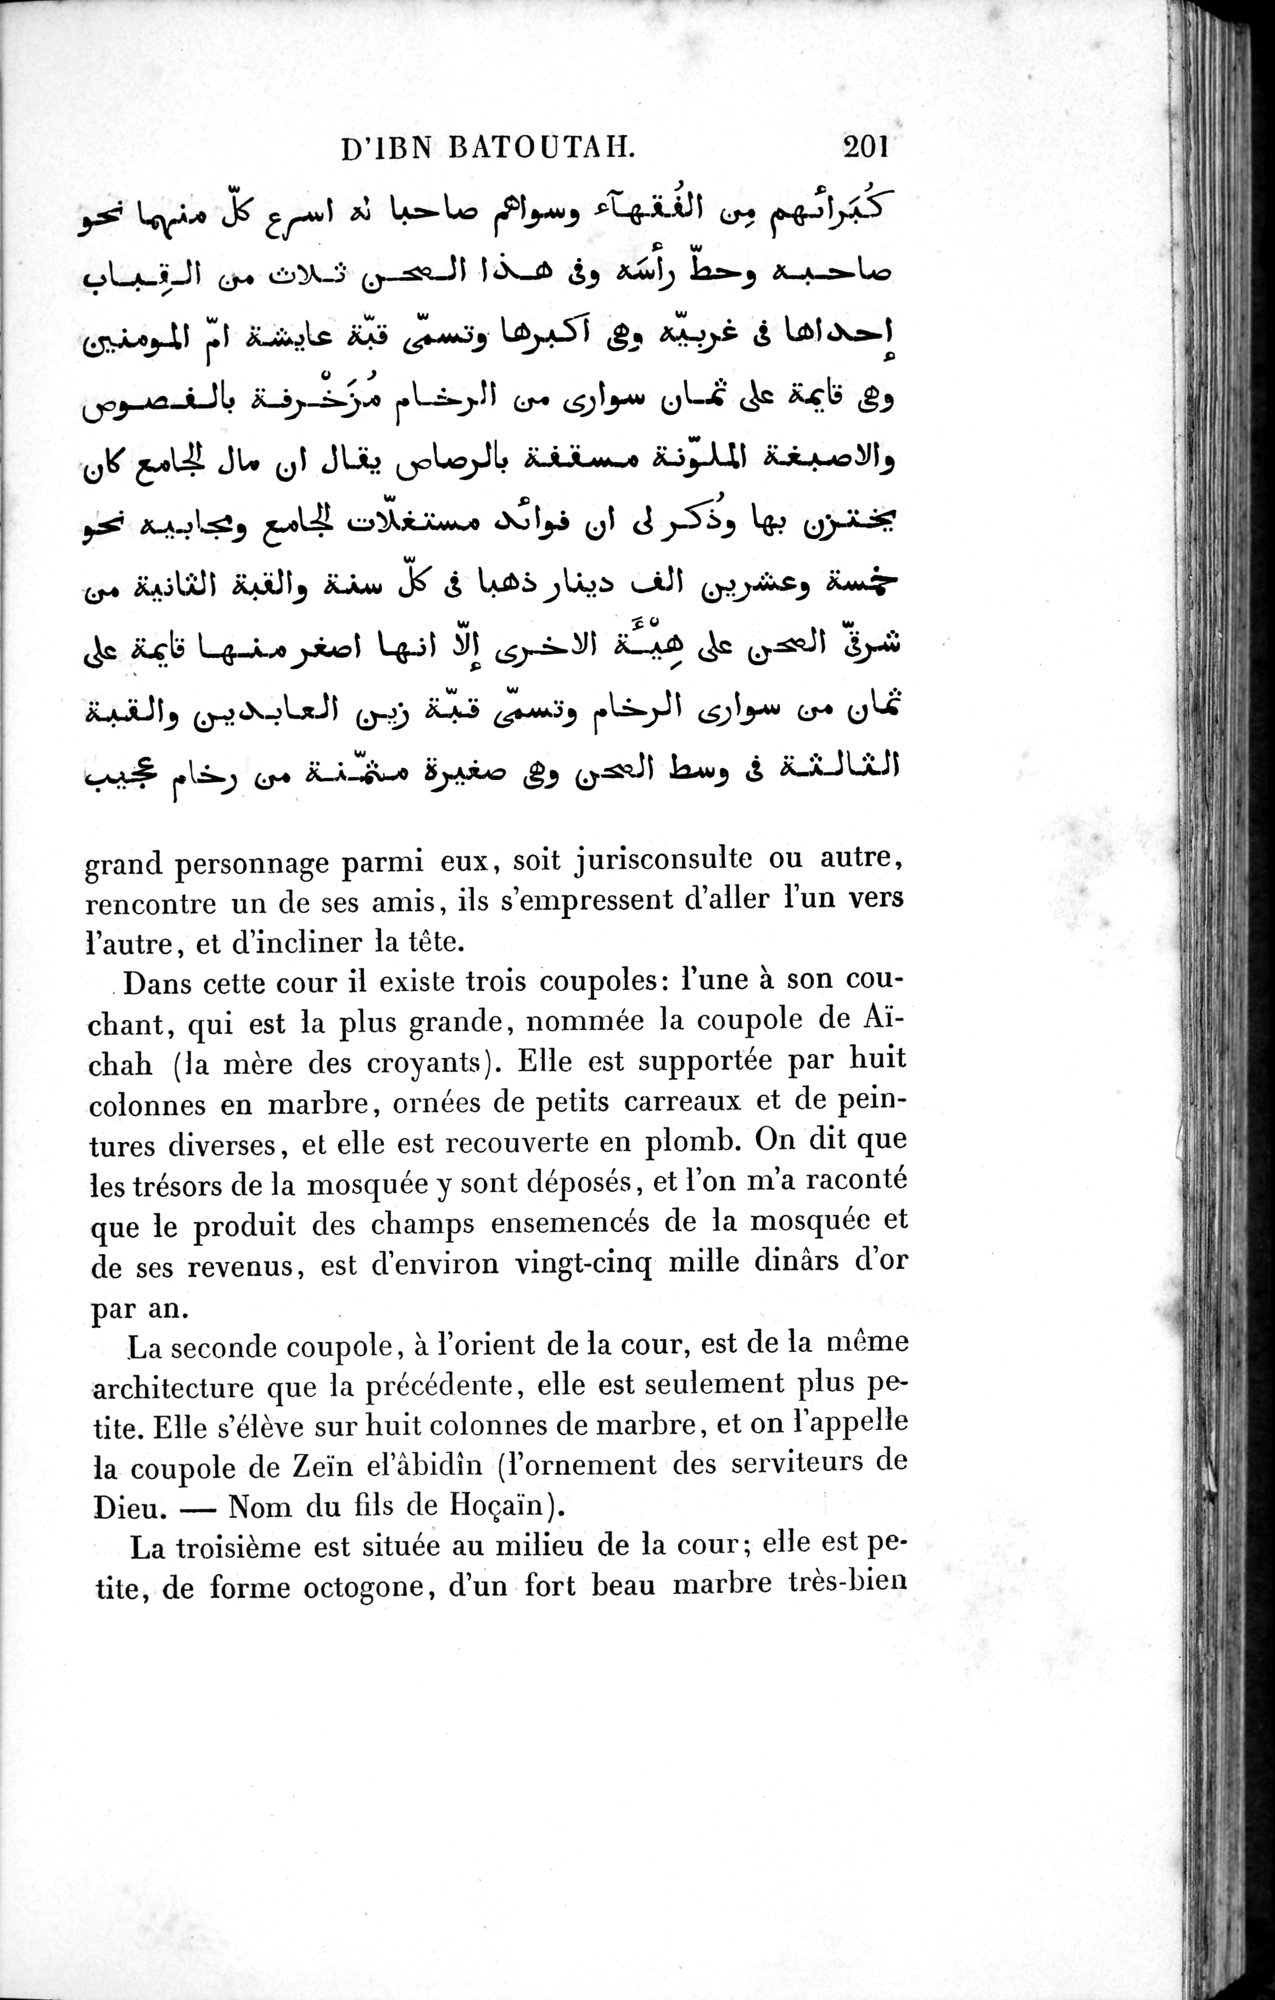 Voyages d'Ibn Batoutah : vol.1 / Page 261 (Grayscale High Resolution Image)